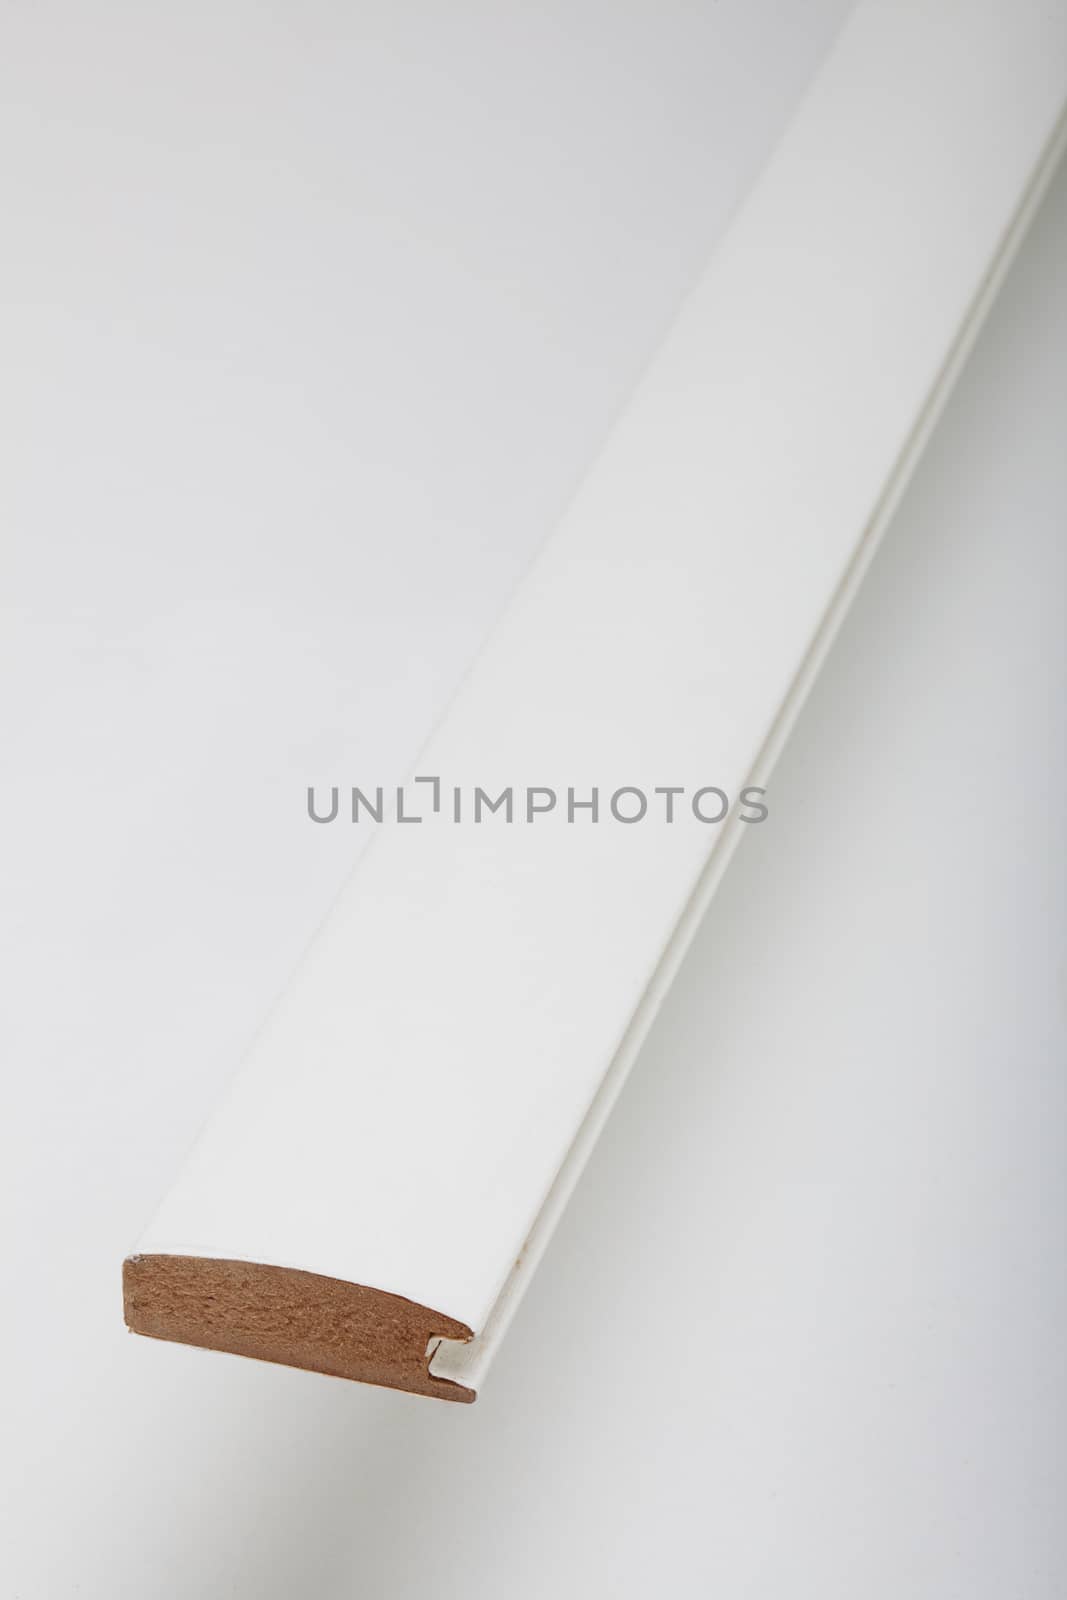 white long molding made of mdf, on white surface